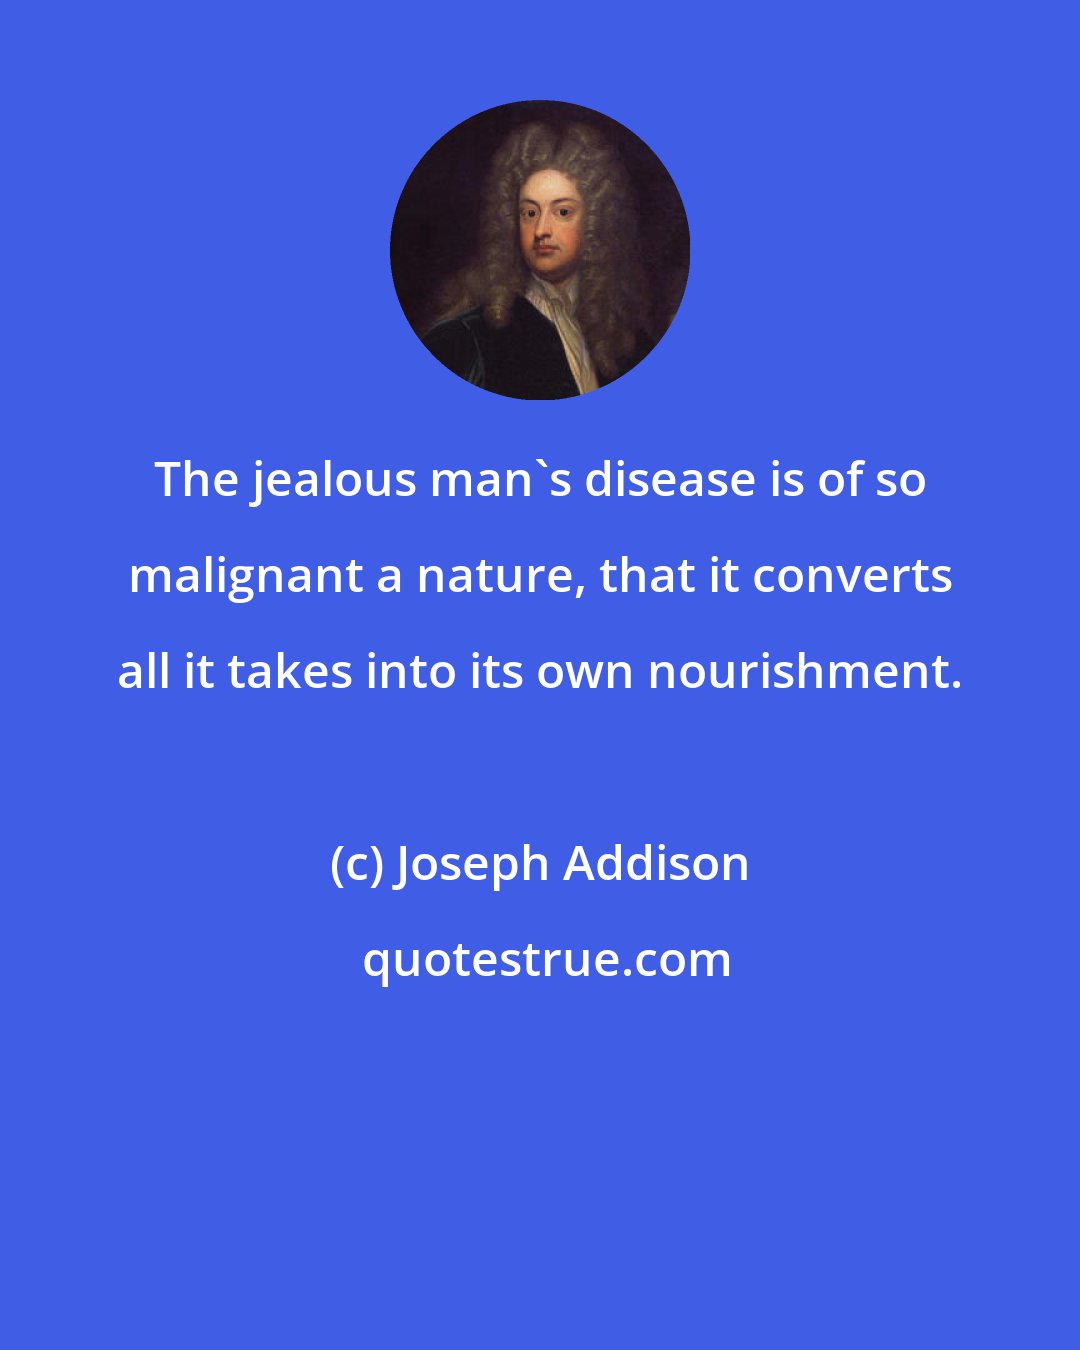 Joseph Addison: The jealous man's disease is of so malignant a nature, that it converts all it takes into its own nourishment.